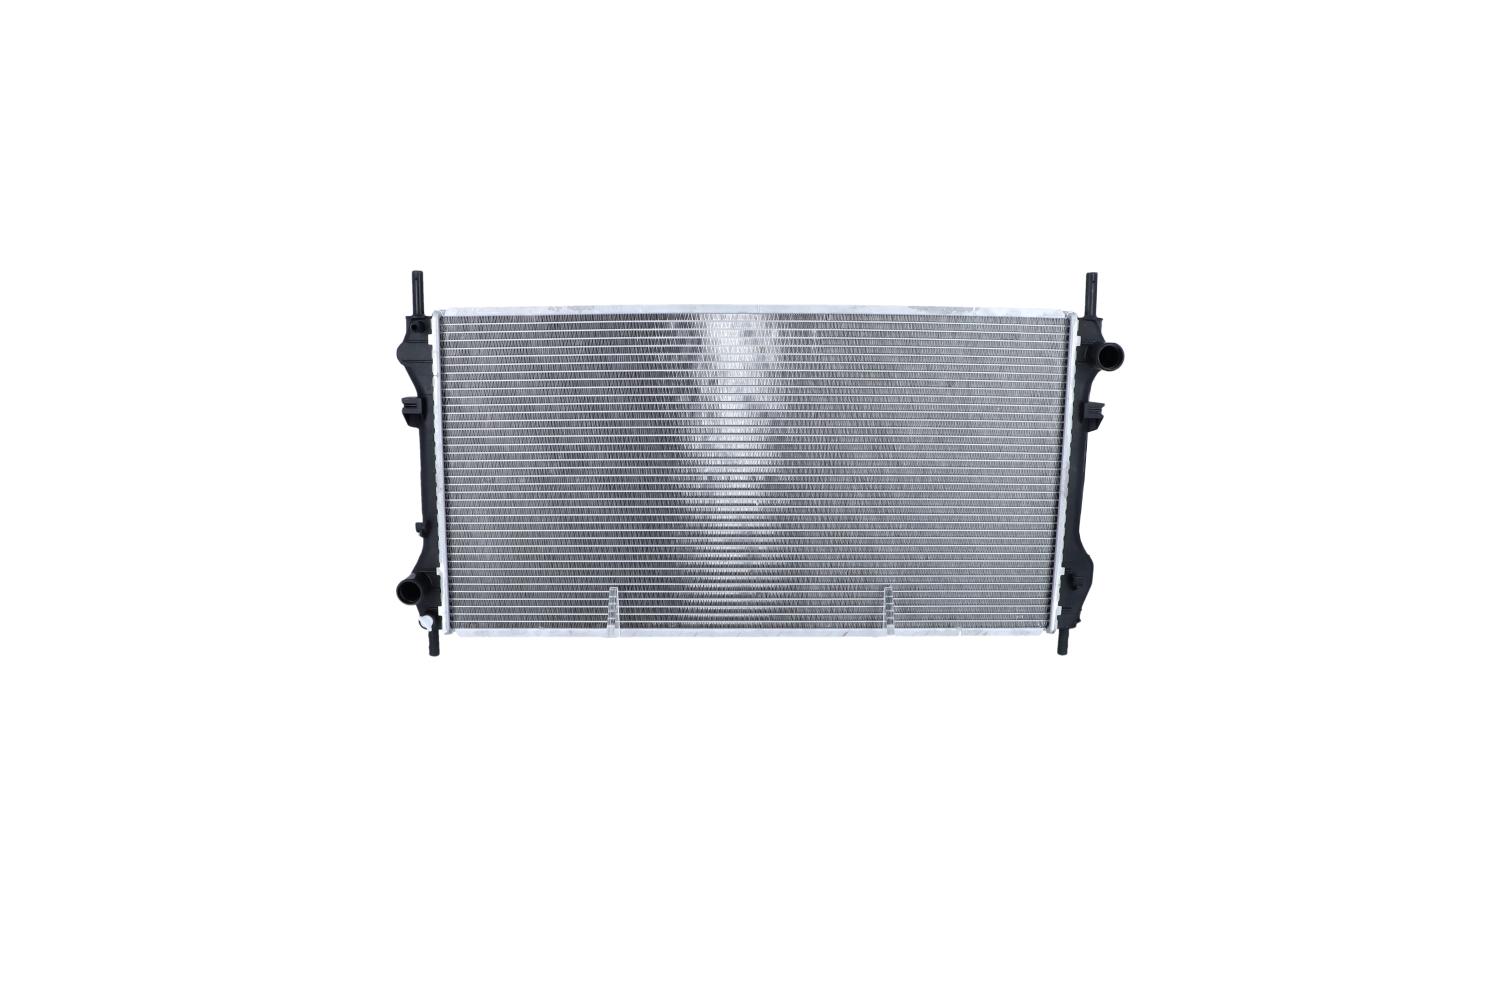 NRF 519697 Engine radiator Aluminium, 770 x 396 x 24 mm, with mounting parts, Brazed cooling fins